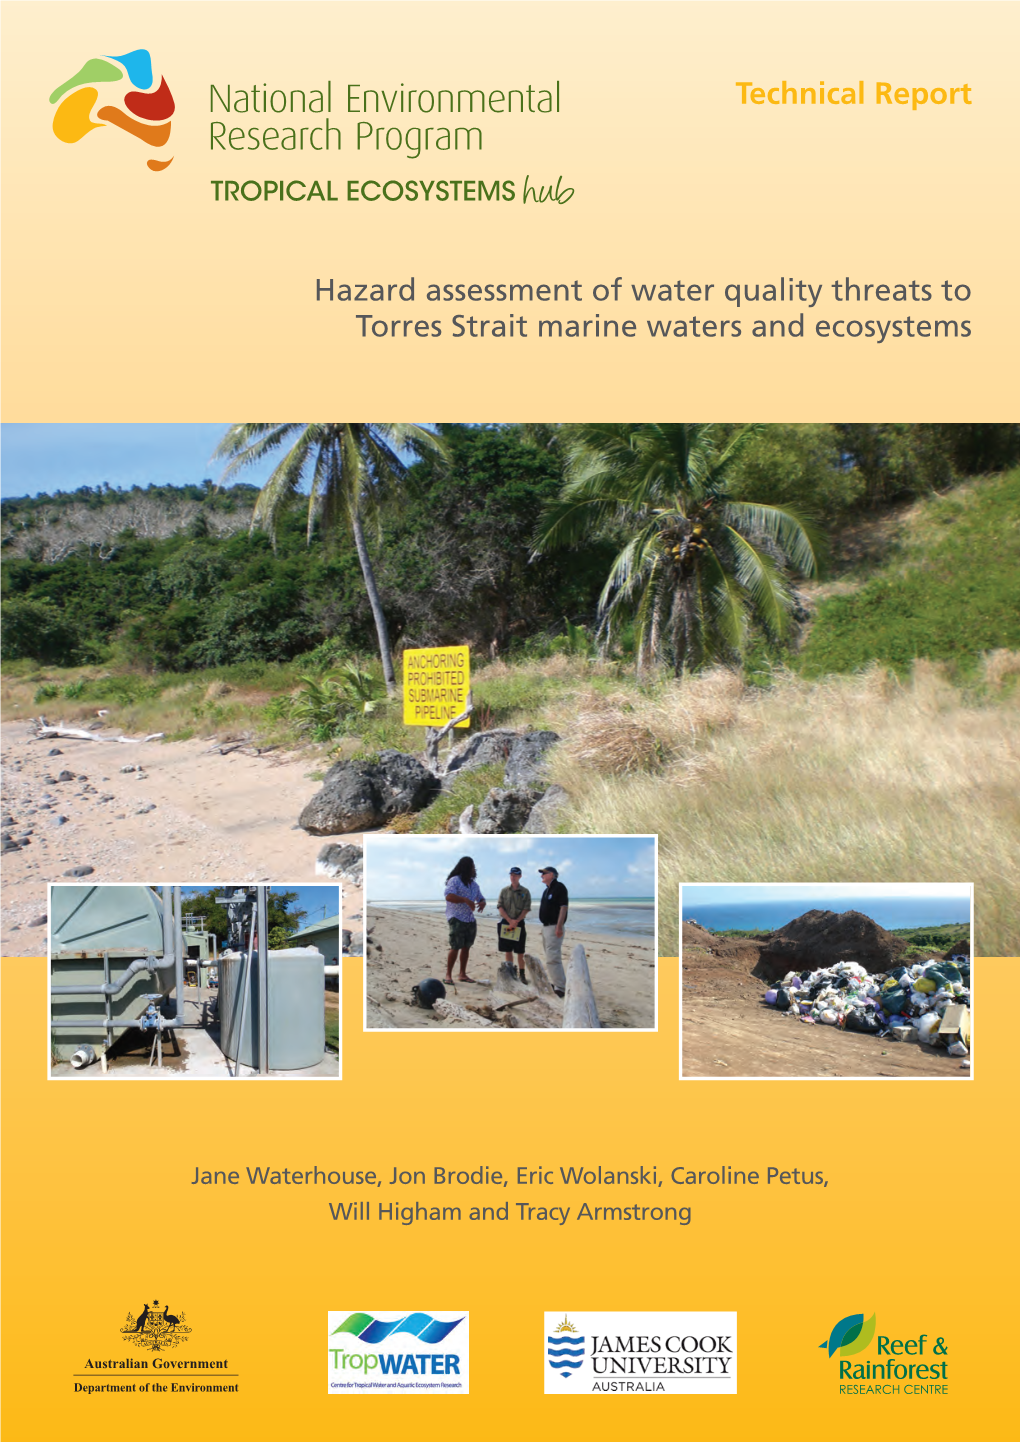 Hazard Assessment of Water Quality Threats to Torres Strait Marine Waters and Ecosystems